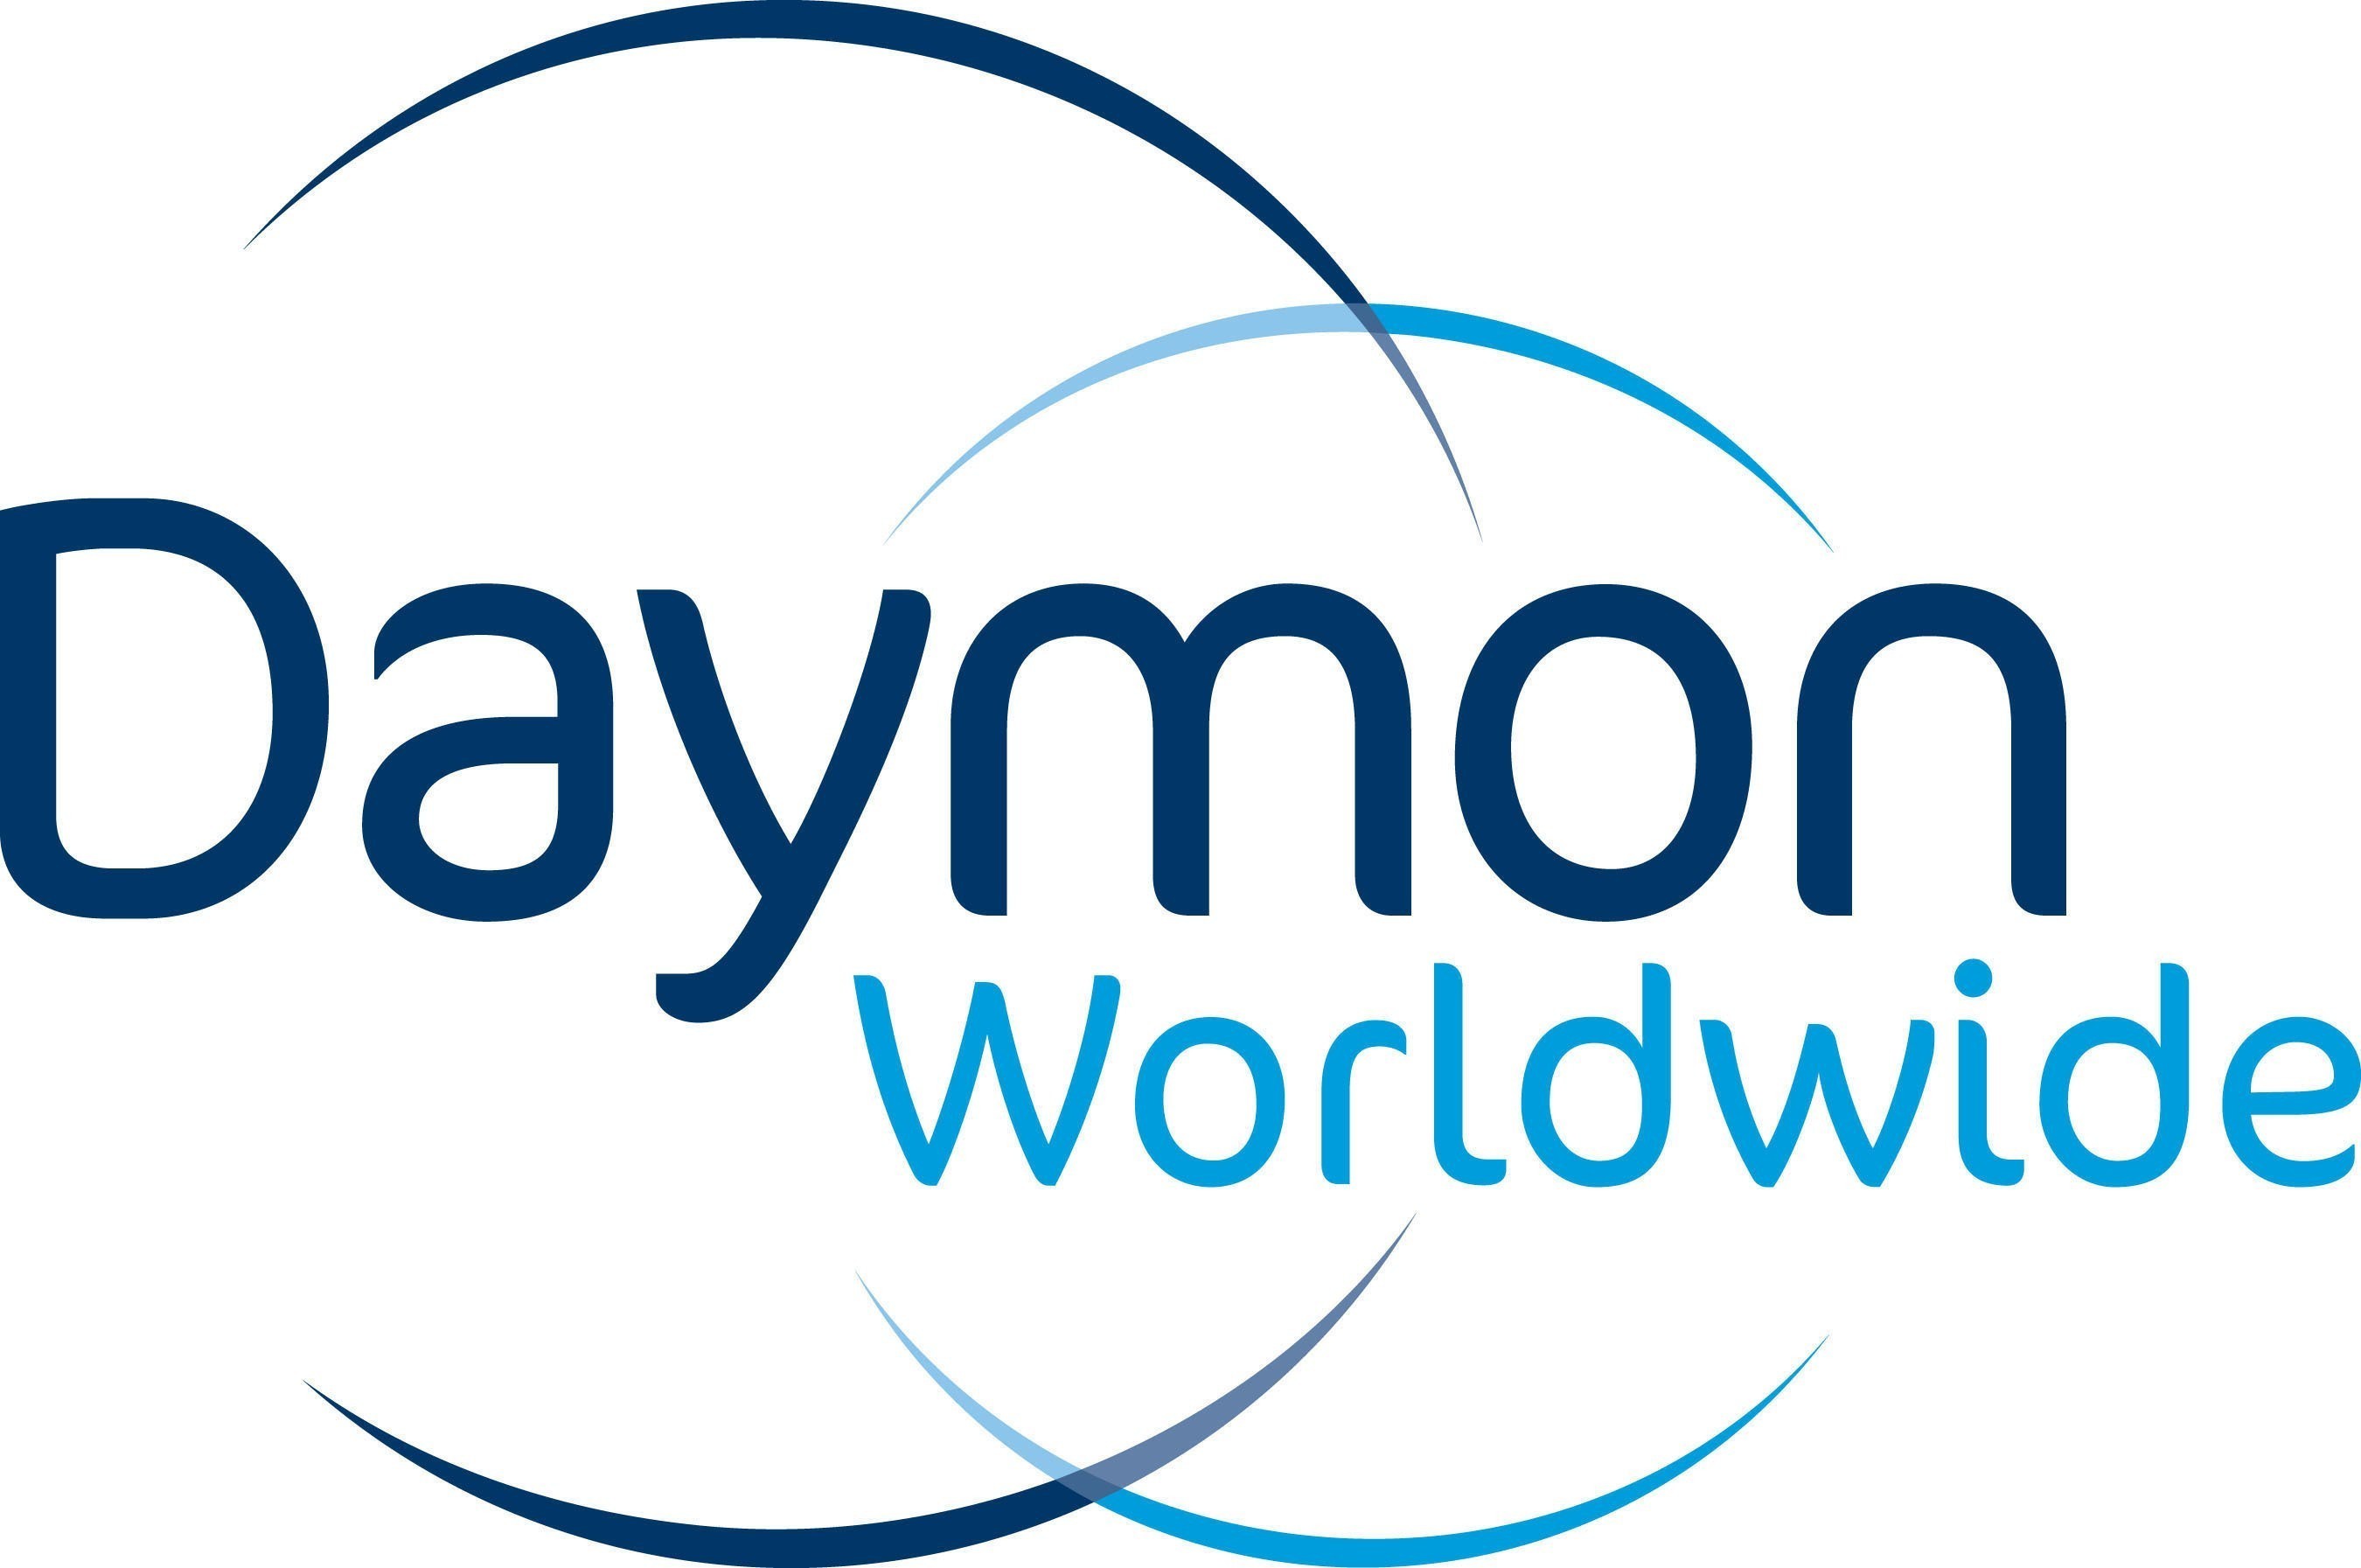 Daymon Worldwide, the global leader in consumables retailing.